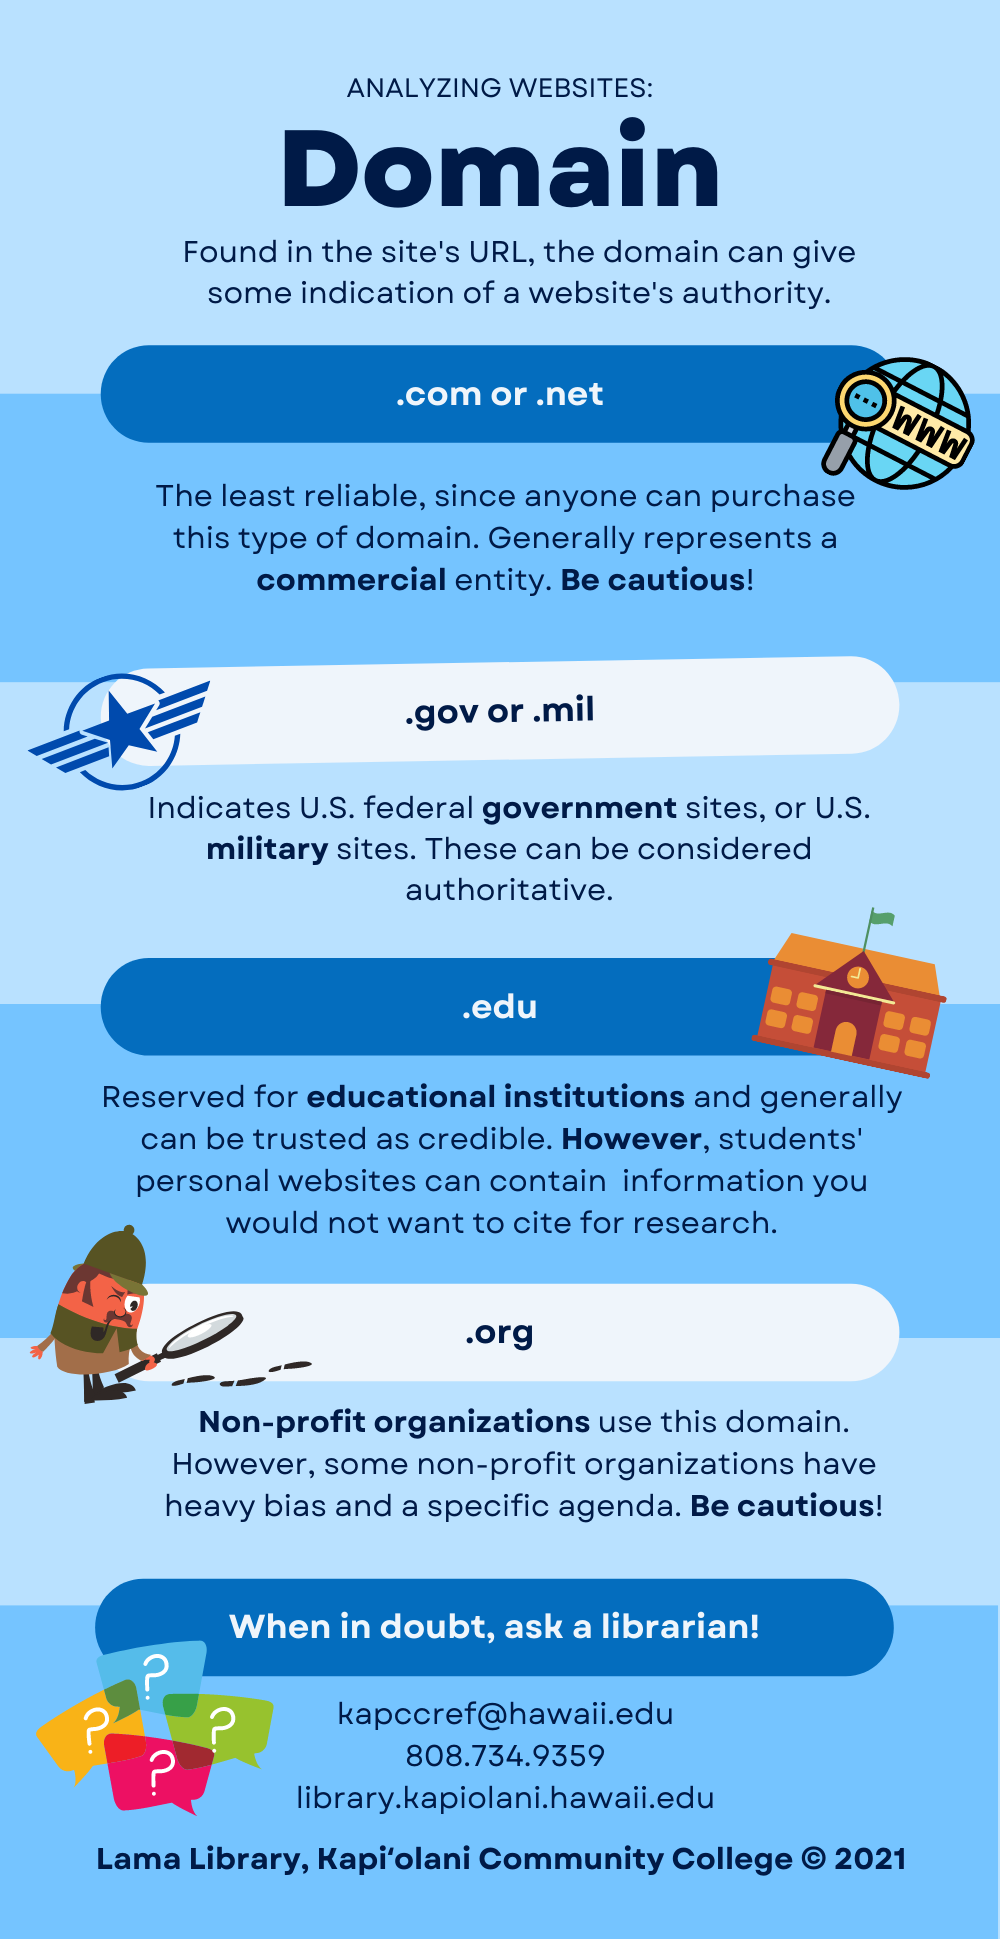 infographic explaining the different domains that can be used to help analyze a website.